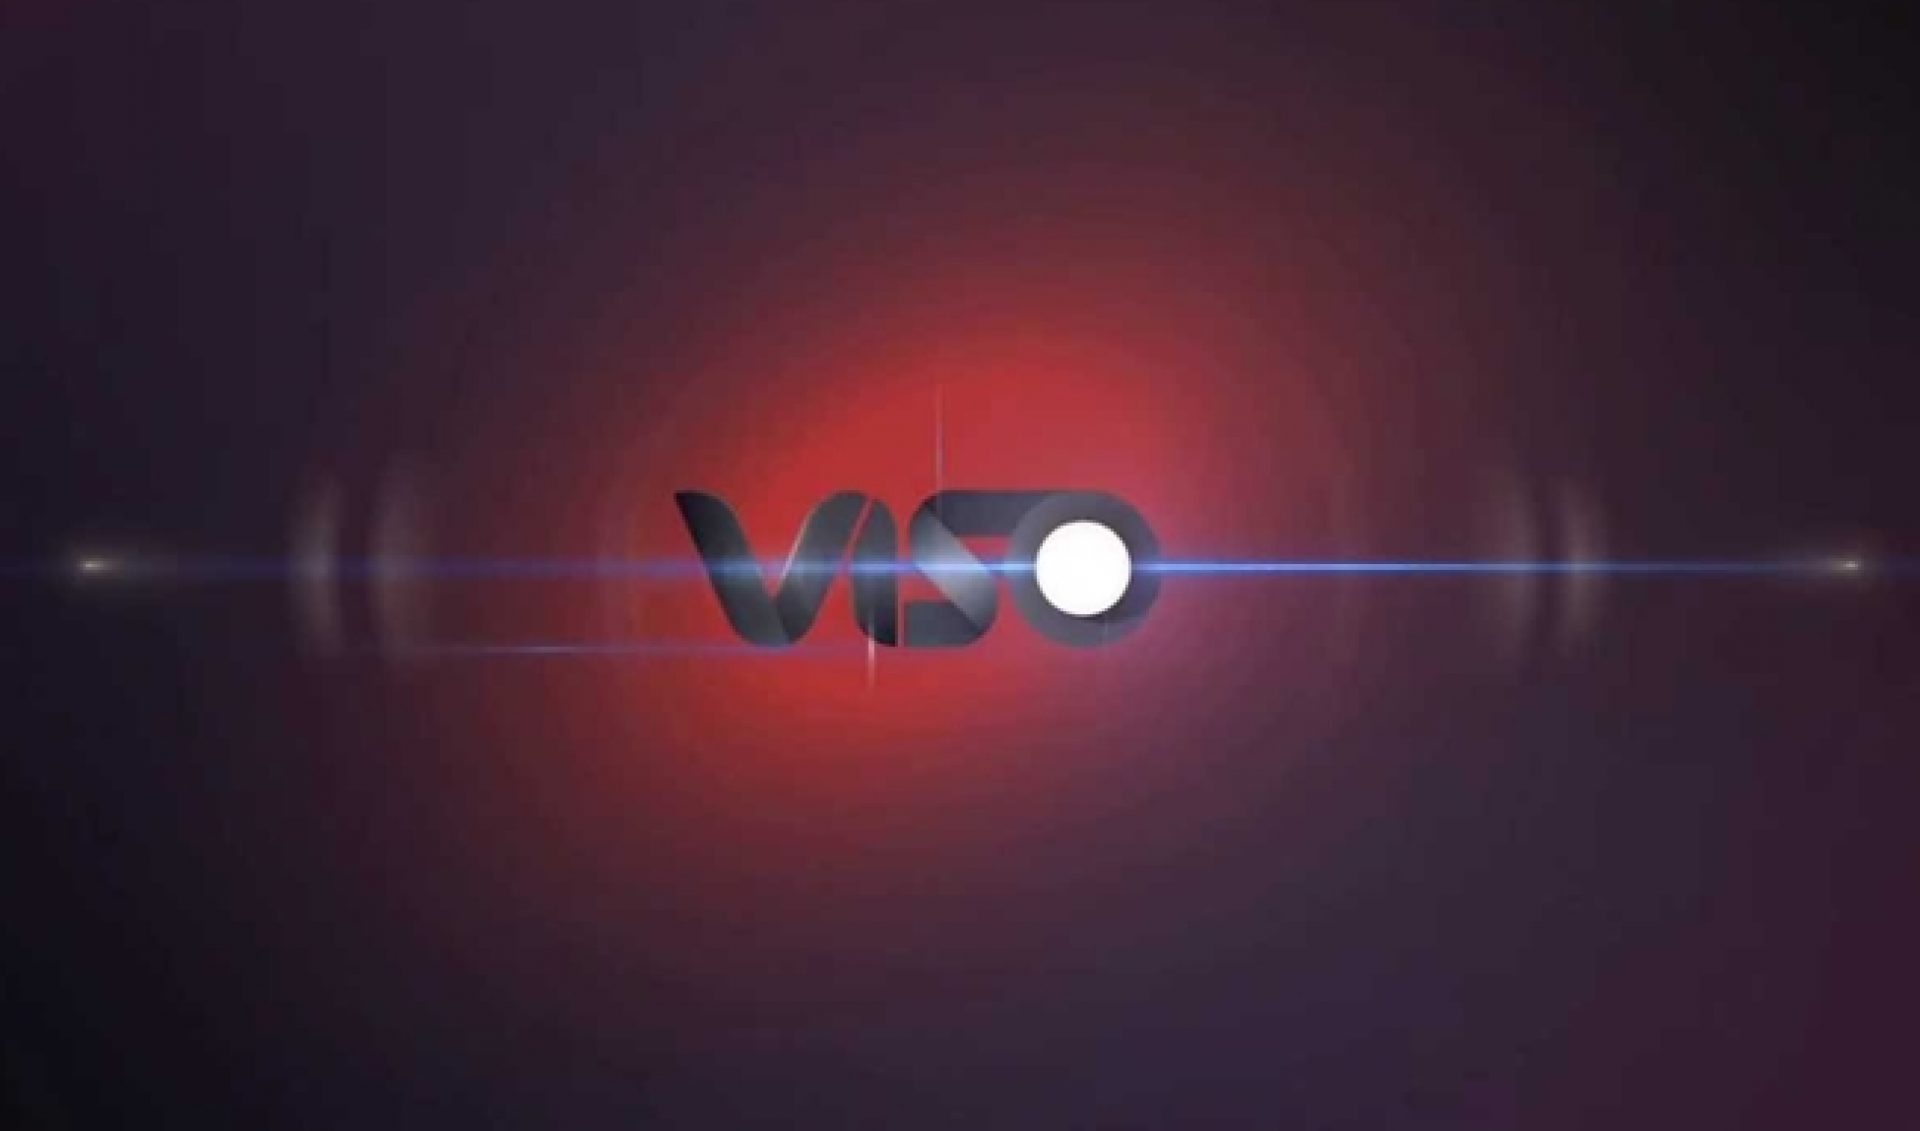 YouTube Millionaires: VISO Trailers Brings Film Clips To You